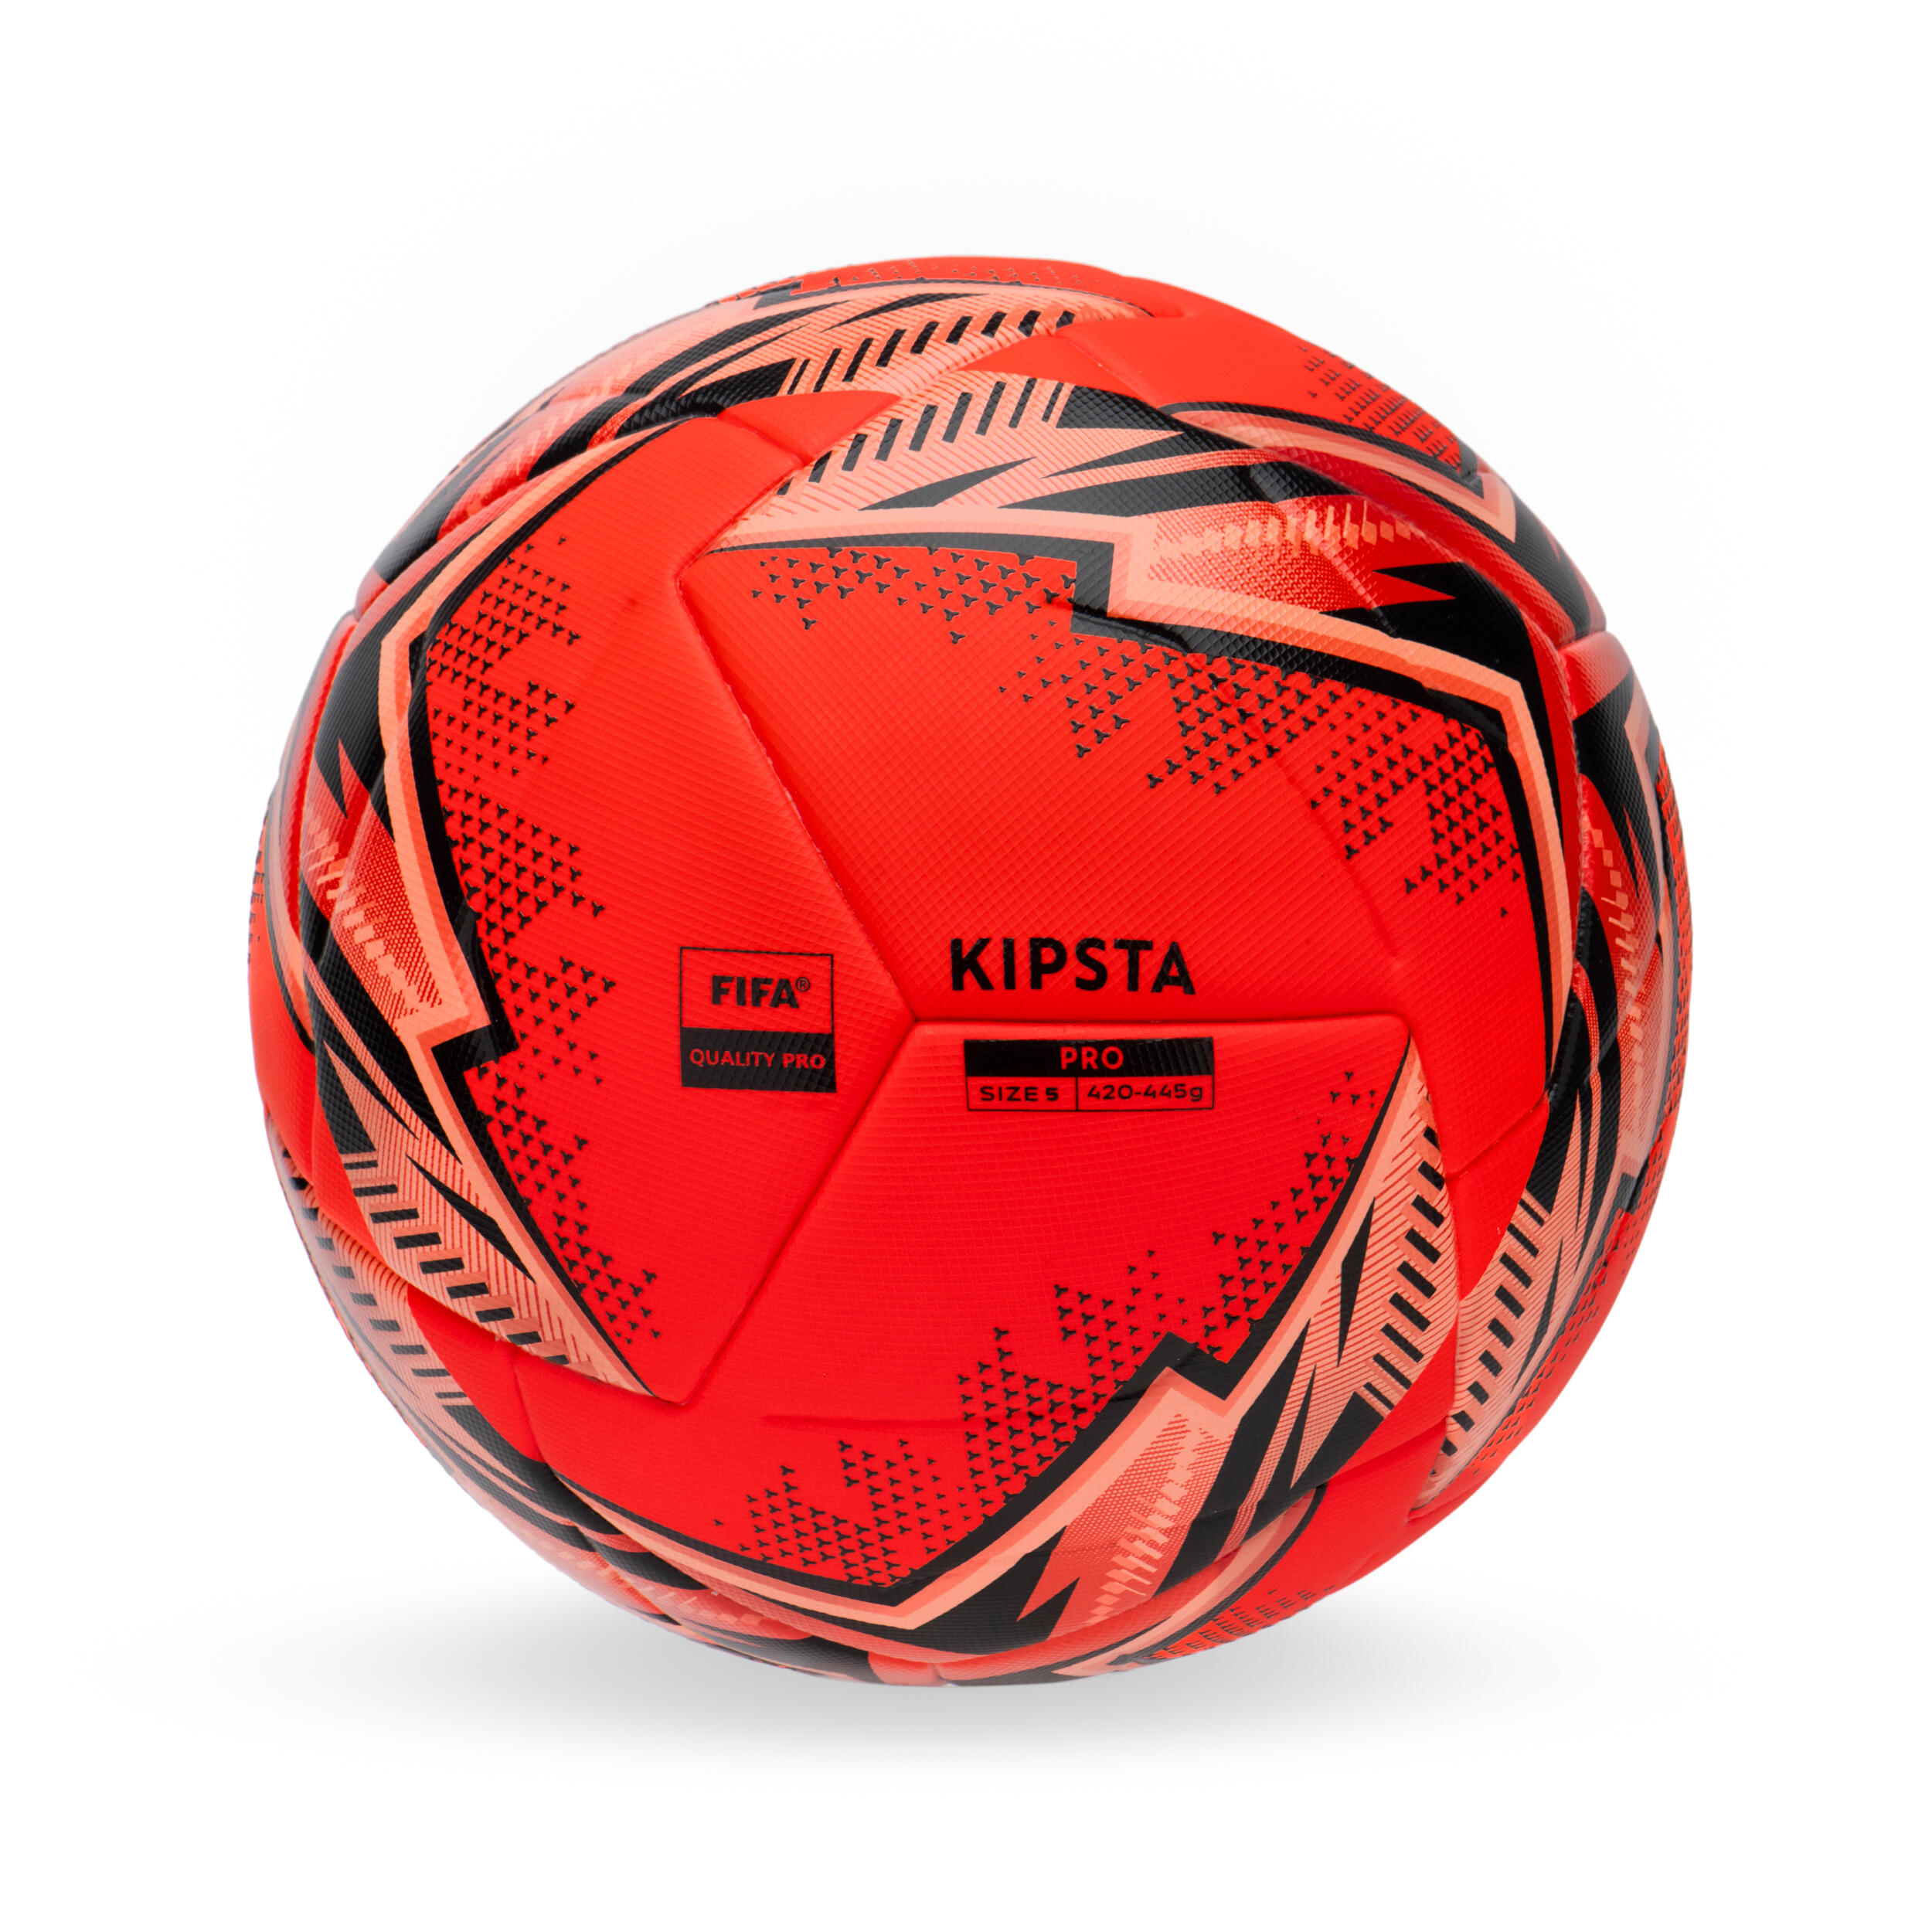 Kipsta Thermobonded Size 5 Fifa Quality Pro Football Ball - Red